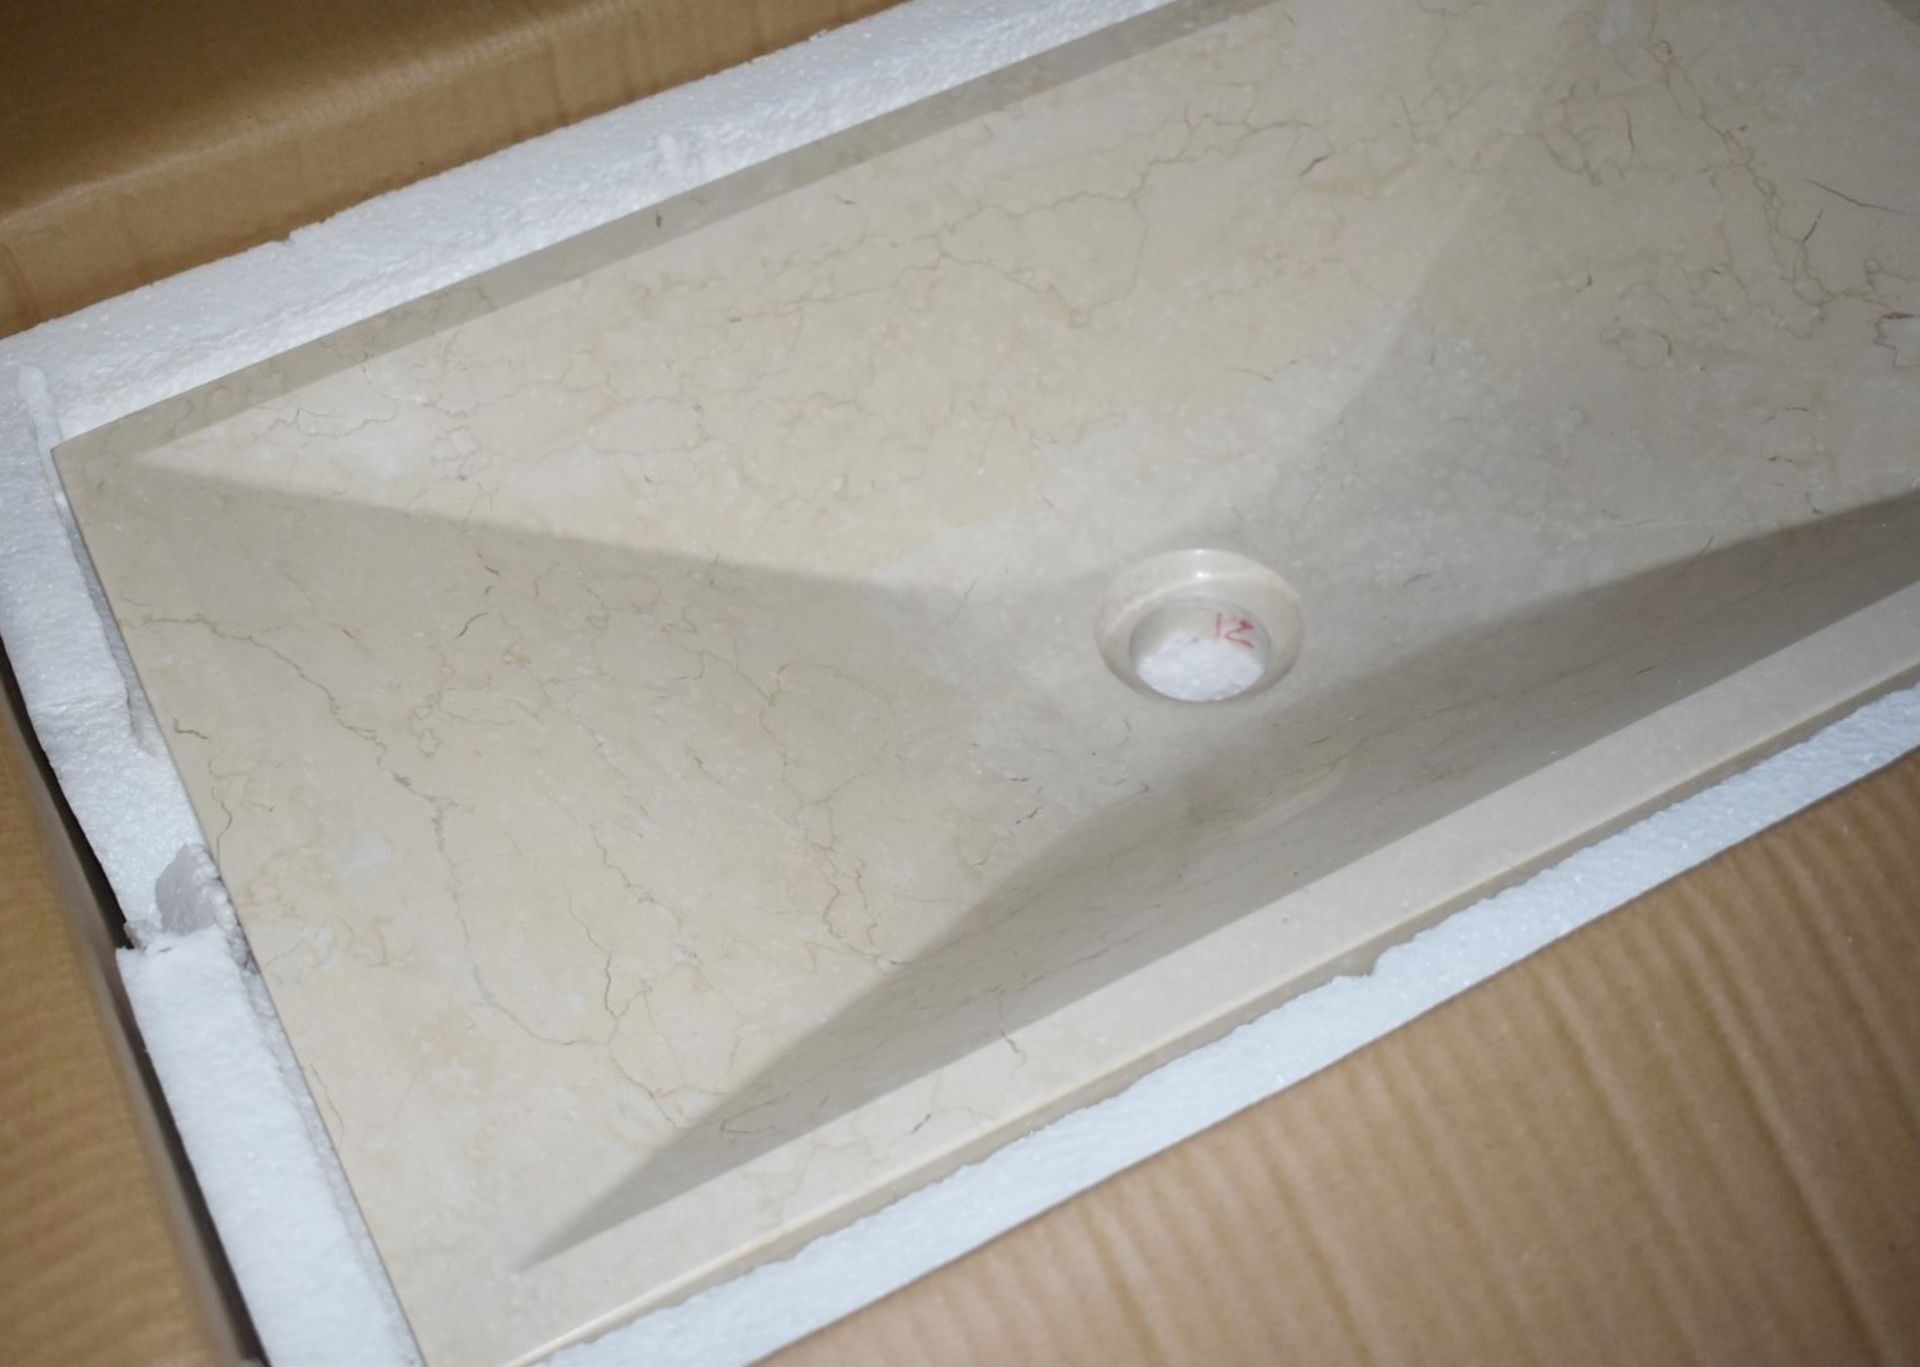 1 x Stonearth 'Karo' Solid Galala Marble Stone Countertop Sink Basin - New Boxed Stock - Image 5 of 8